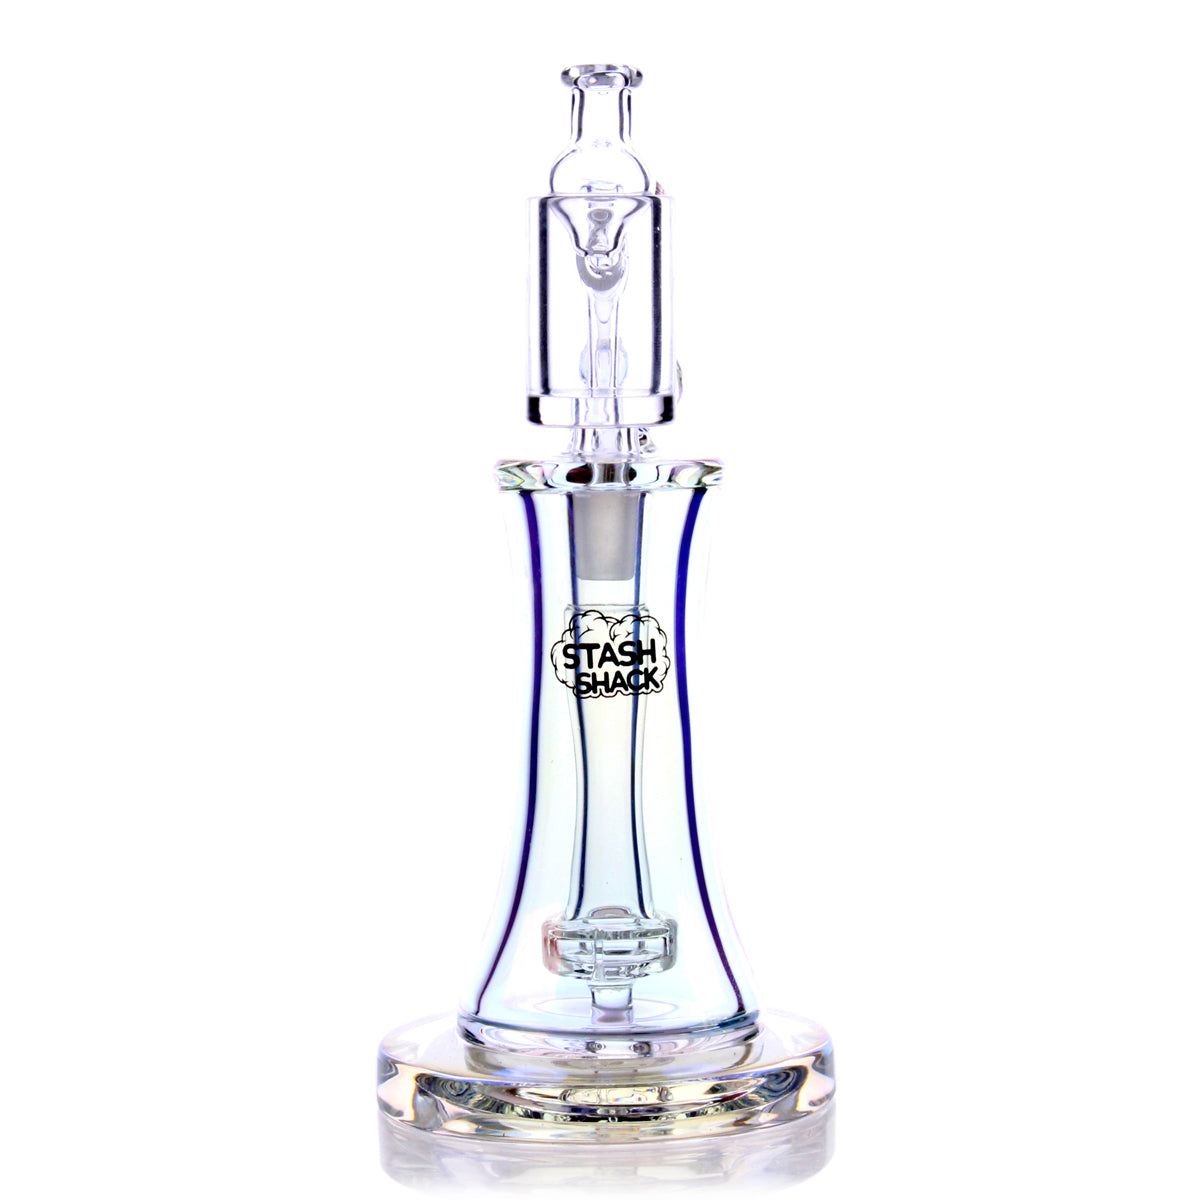 Aurelia Mini Rig by The Stash Shack, 5" Borosilicate Glass Dab Rig with 90 Degree Joint, Front View